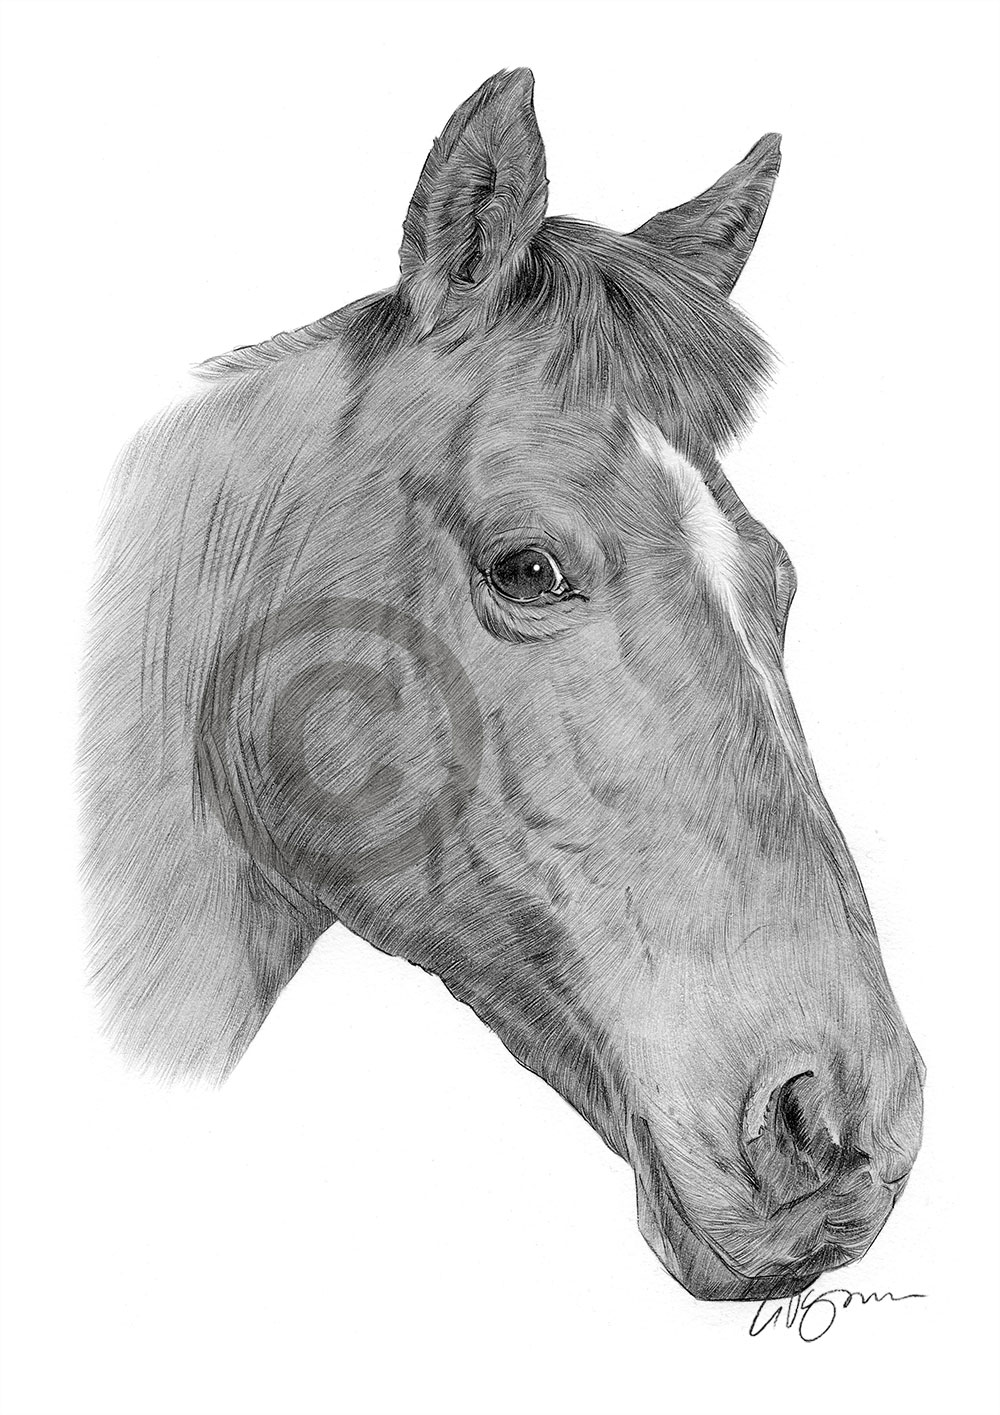 Pencil drawing of a chestnut horse by artist Gary Tymon